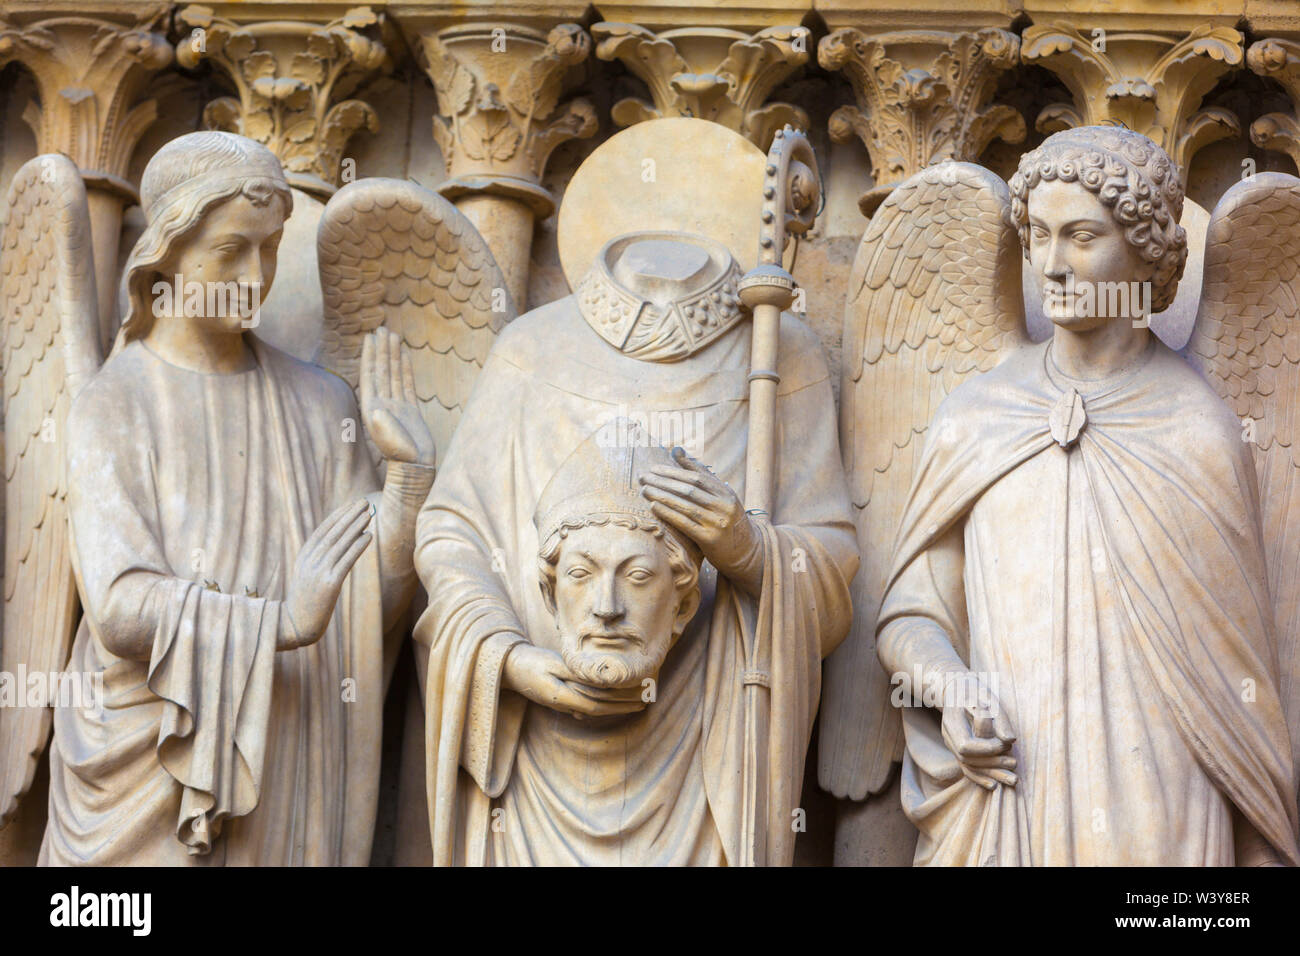 France, Paris, Notre Dame Cathedral, detail of statues on facade Stock Photo